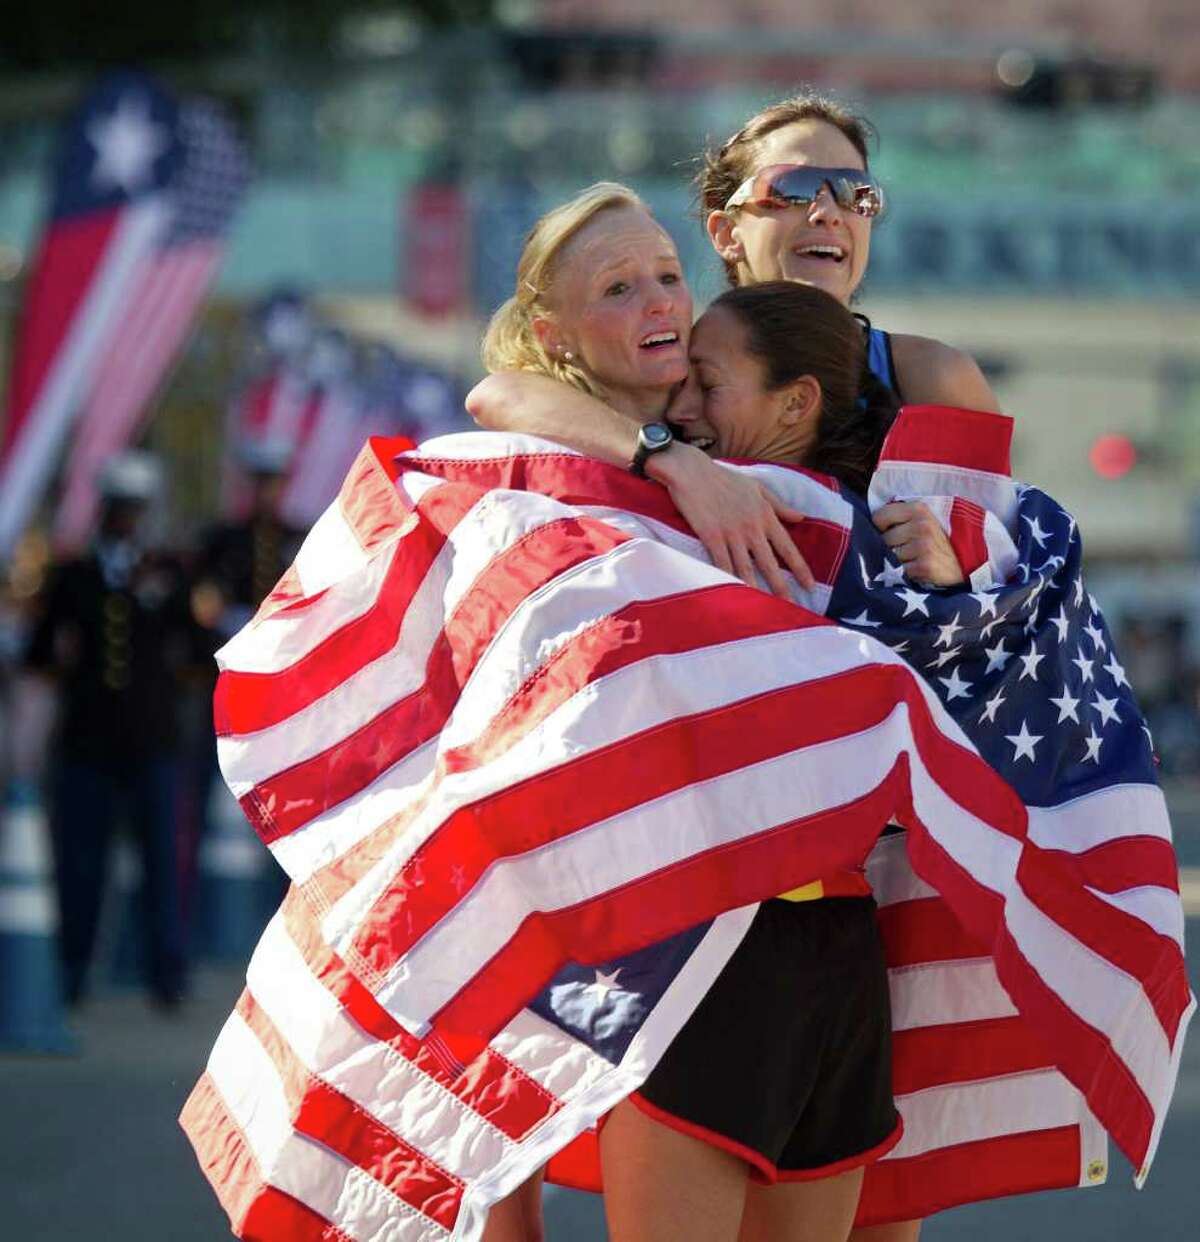 The top three finishers, from left, Shalane Flanagan, Desiree Davila and Kara Goucher celebrate after securing their spots on the team for the 2012 Olympics at the women's U.S. Olympic Trials Marathon. A Trials record five women finished under 2:30 in the race.